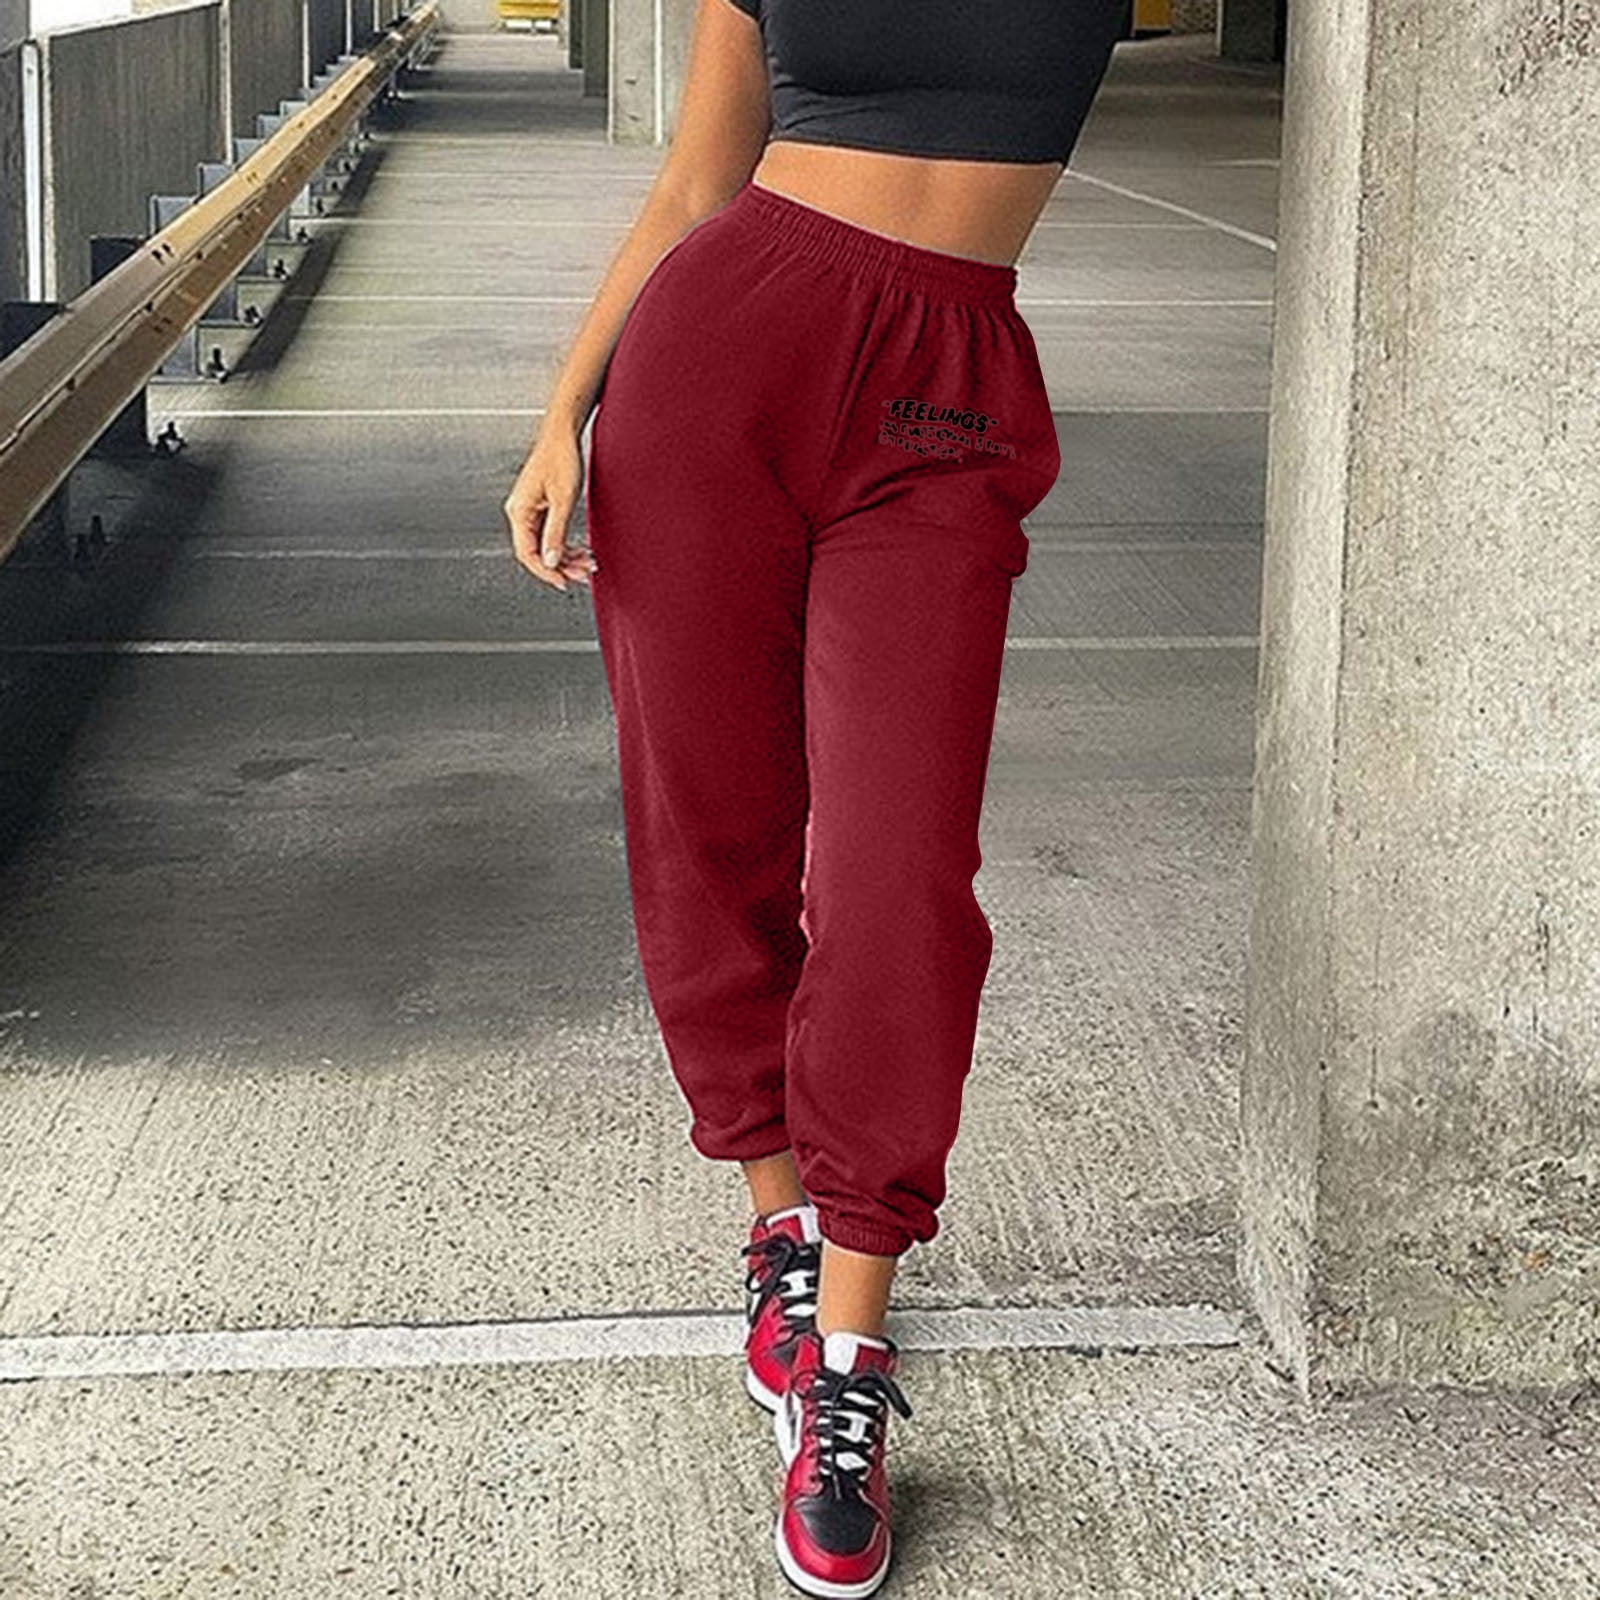 Aayomet Lounge Pants Women Joggers for Women with Pockets,High Waist  Workout Yoga Tapered Sweatpants Women's Lounge Pants,Gray L